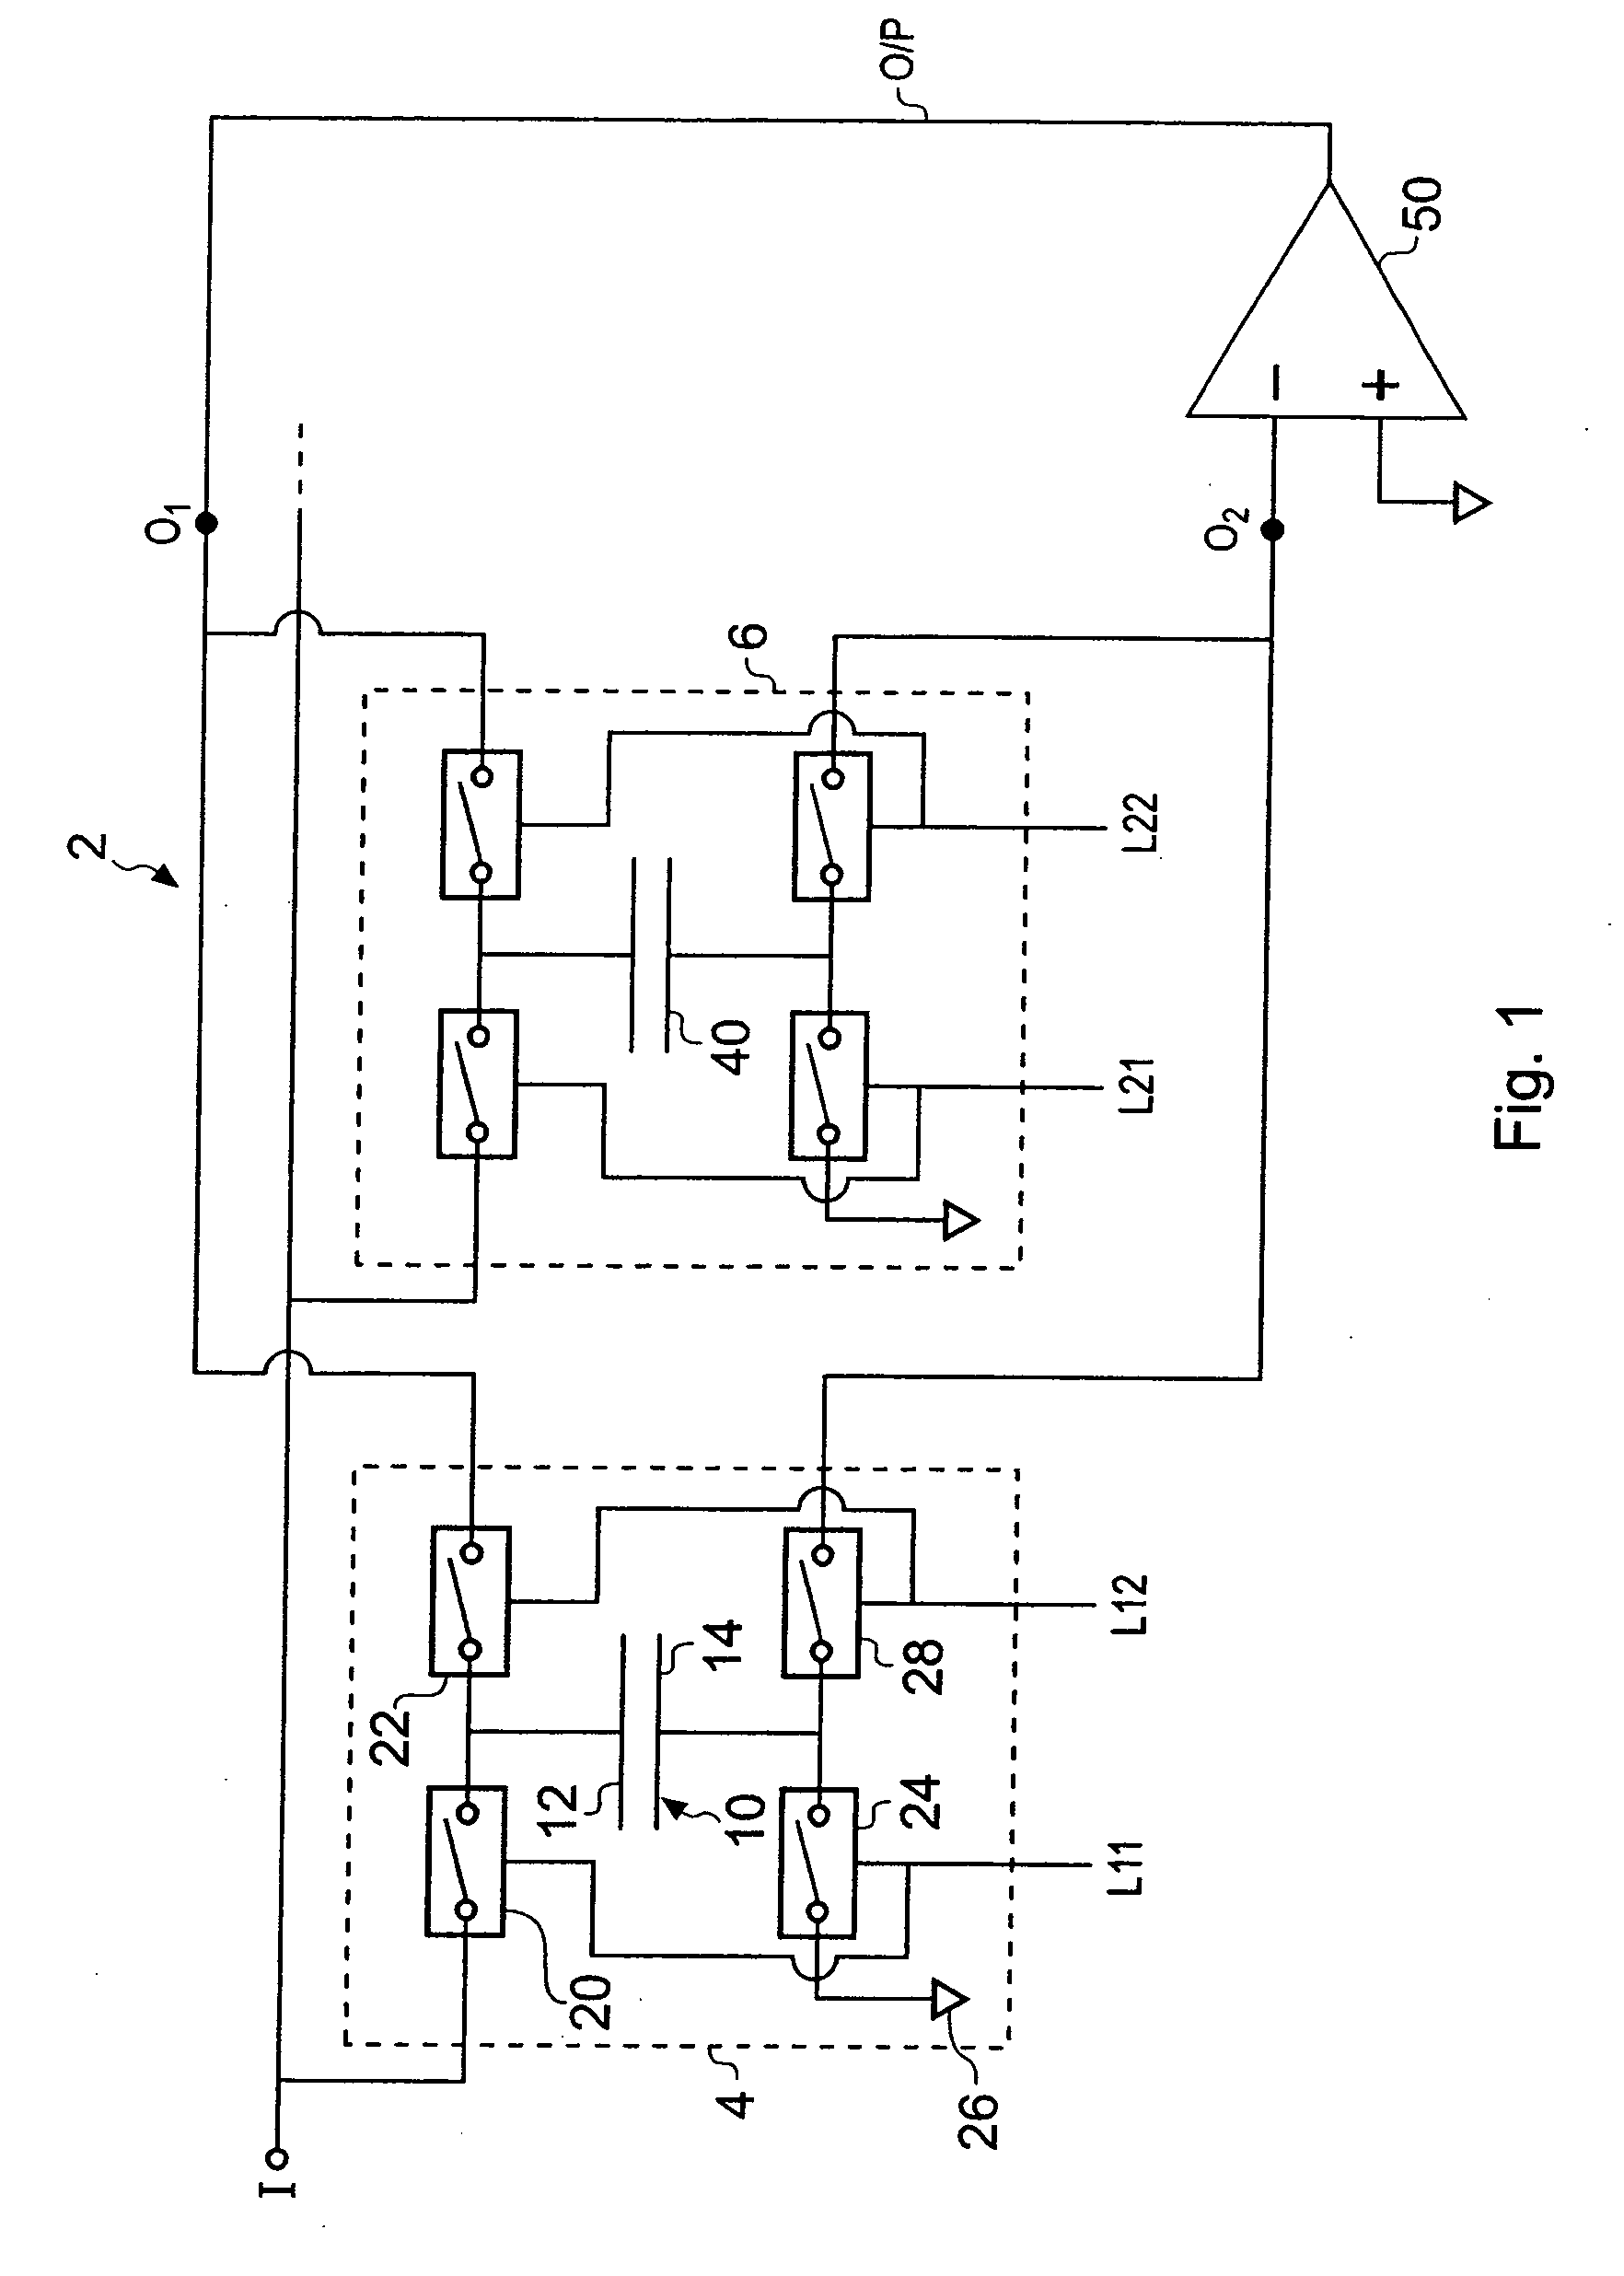 Sample and hold apparatus